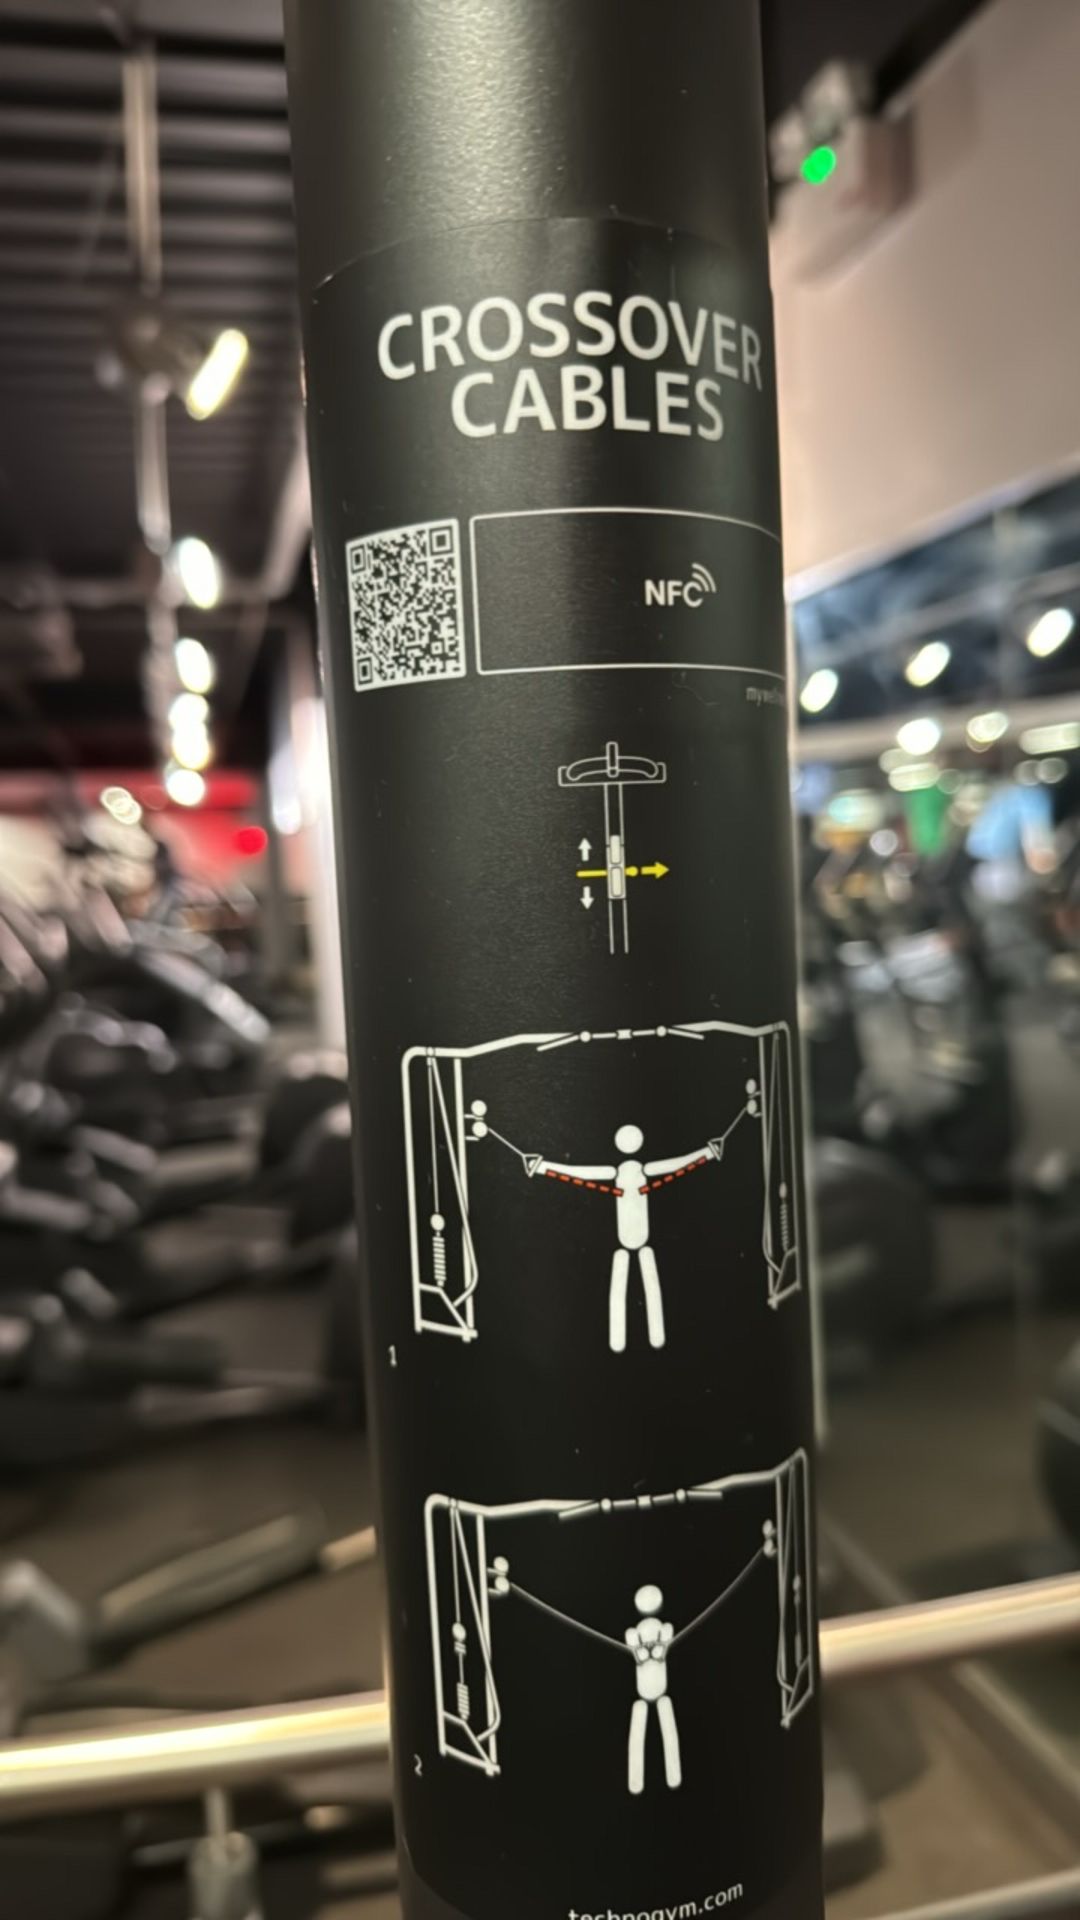 Technogym Crossover Cables Functional Trainer - Image 2 of 8